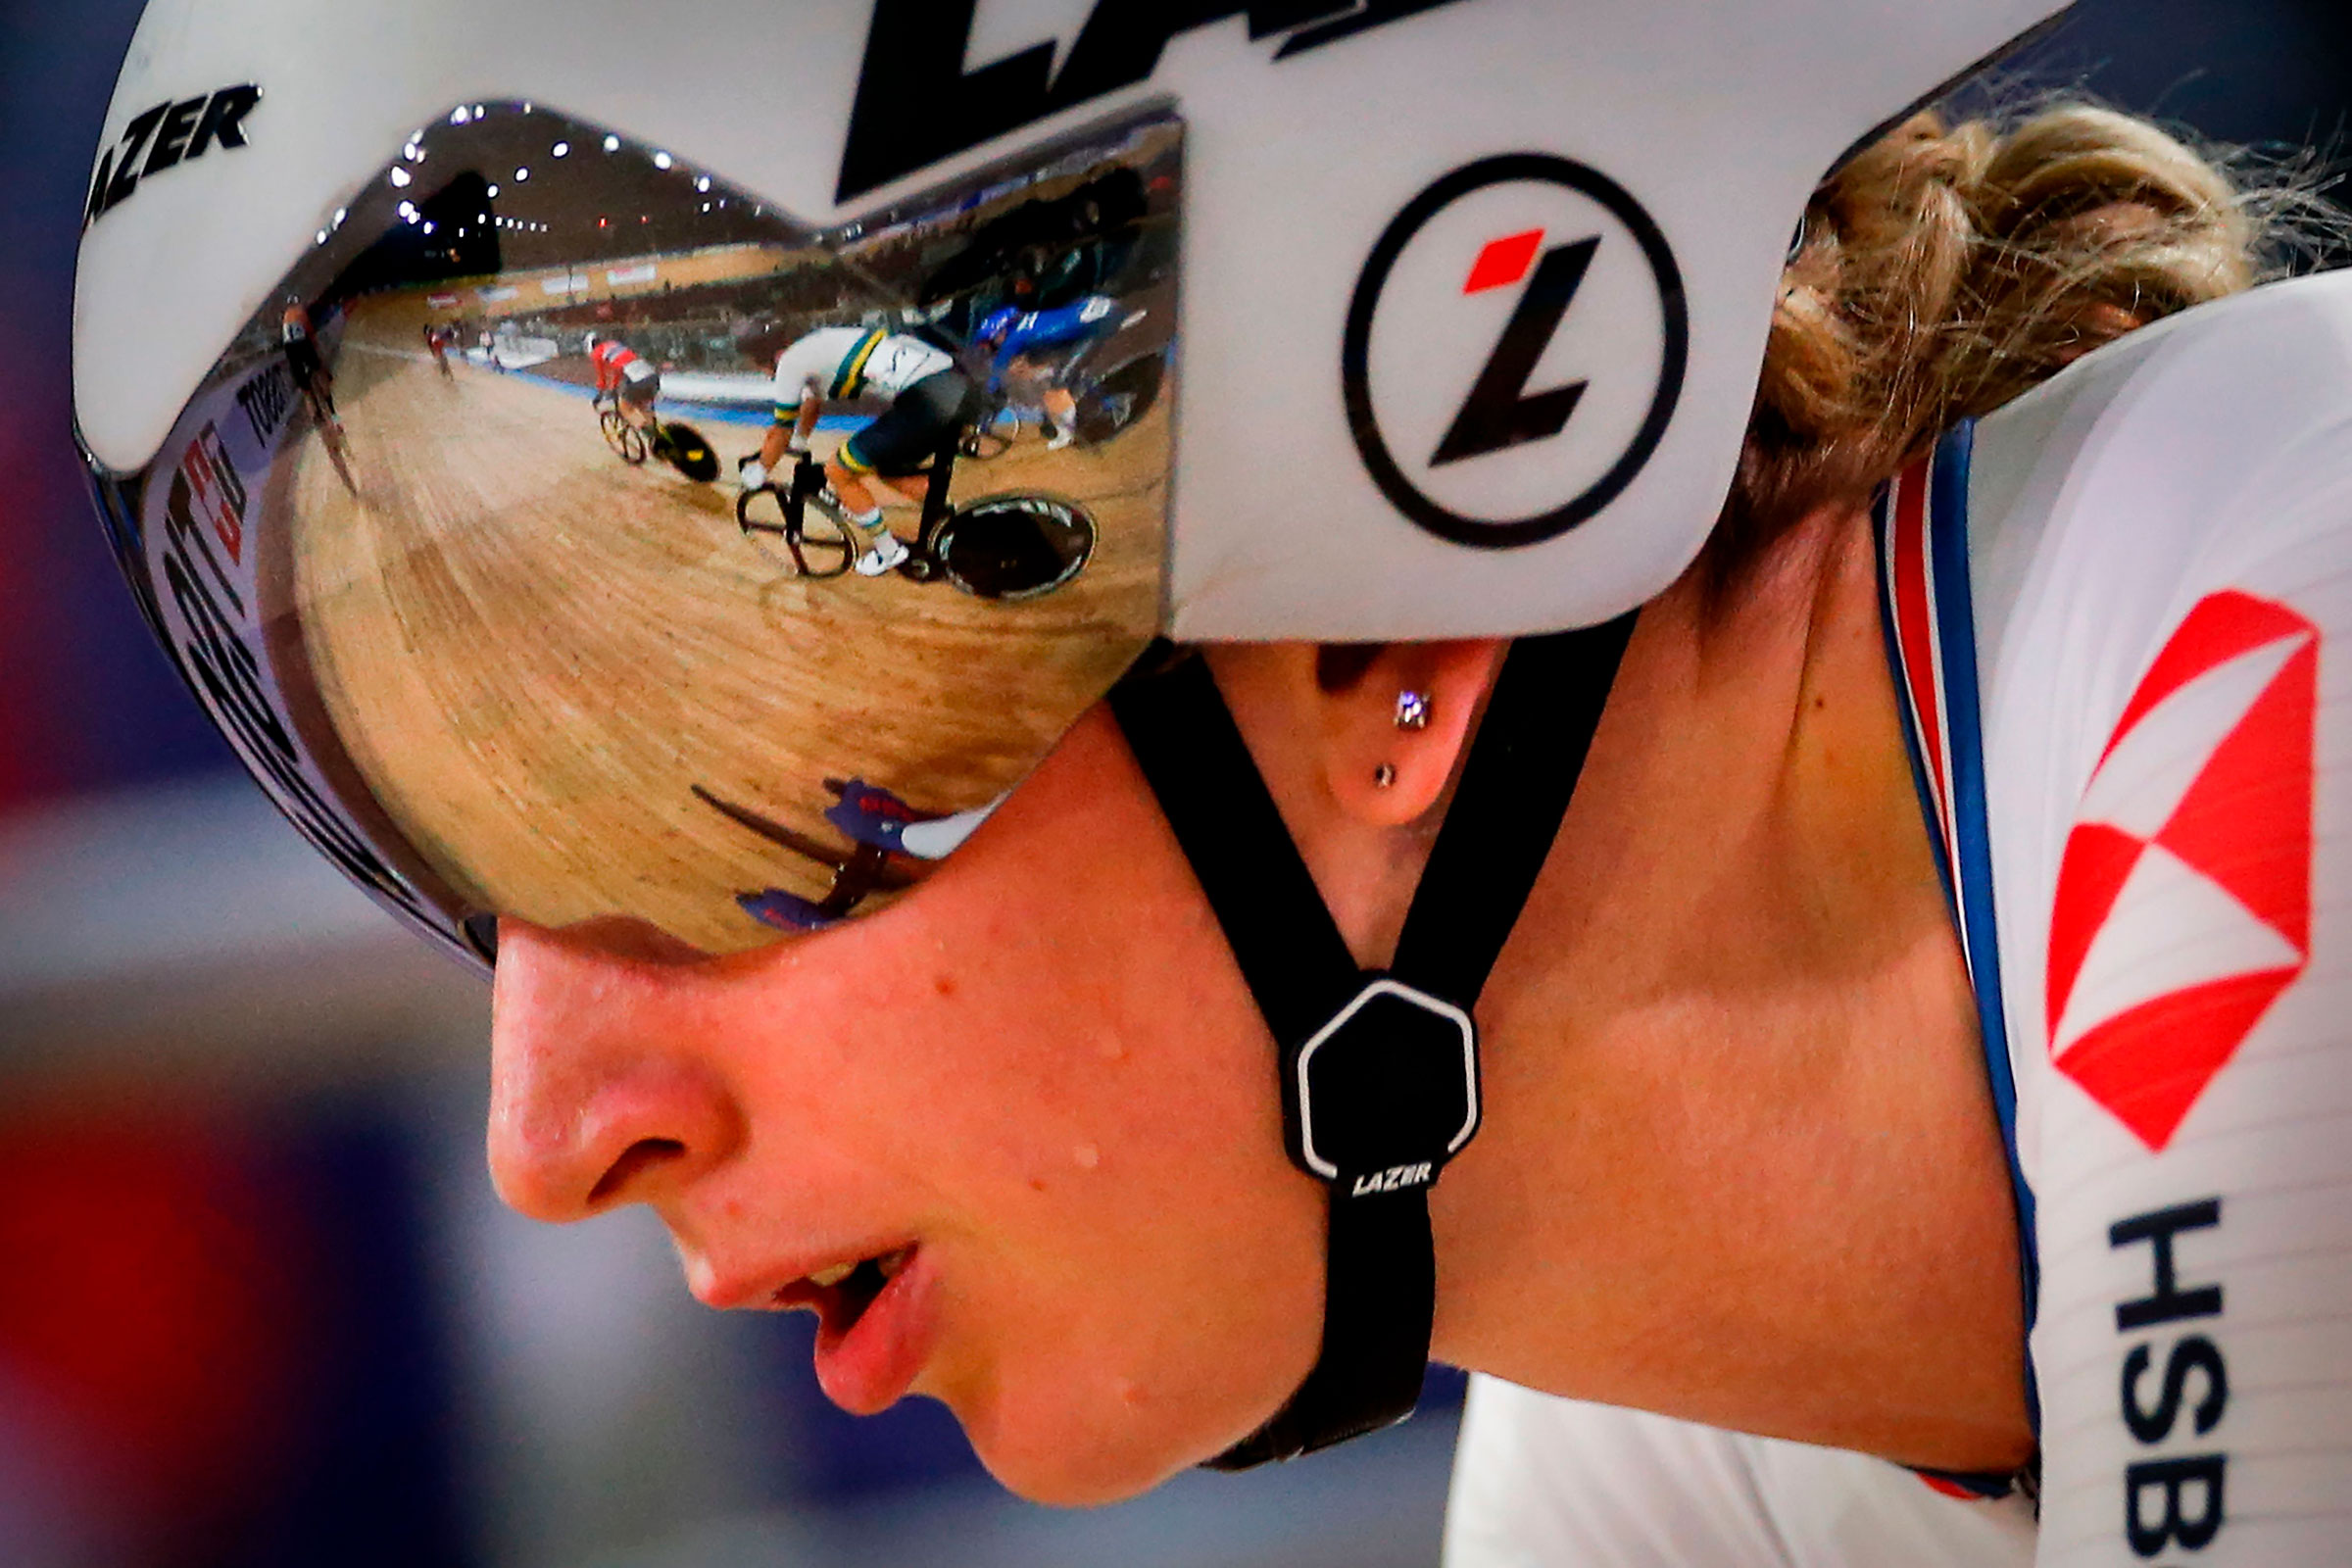 Great Britain's Laura Kenny competes in the Women's Omnium Tempo Race during the UCI track cycling World Championship on February 28, 2020 in Berlin, Germany. (Odd Andresen—AFP/Getty Images)